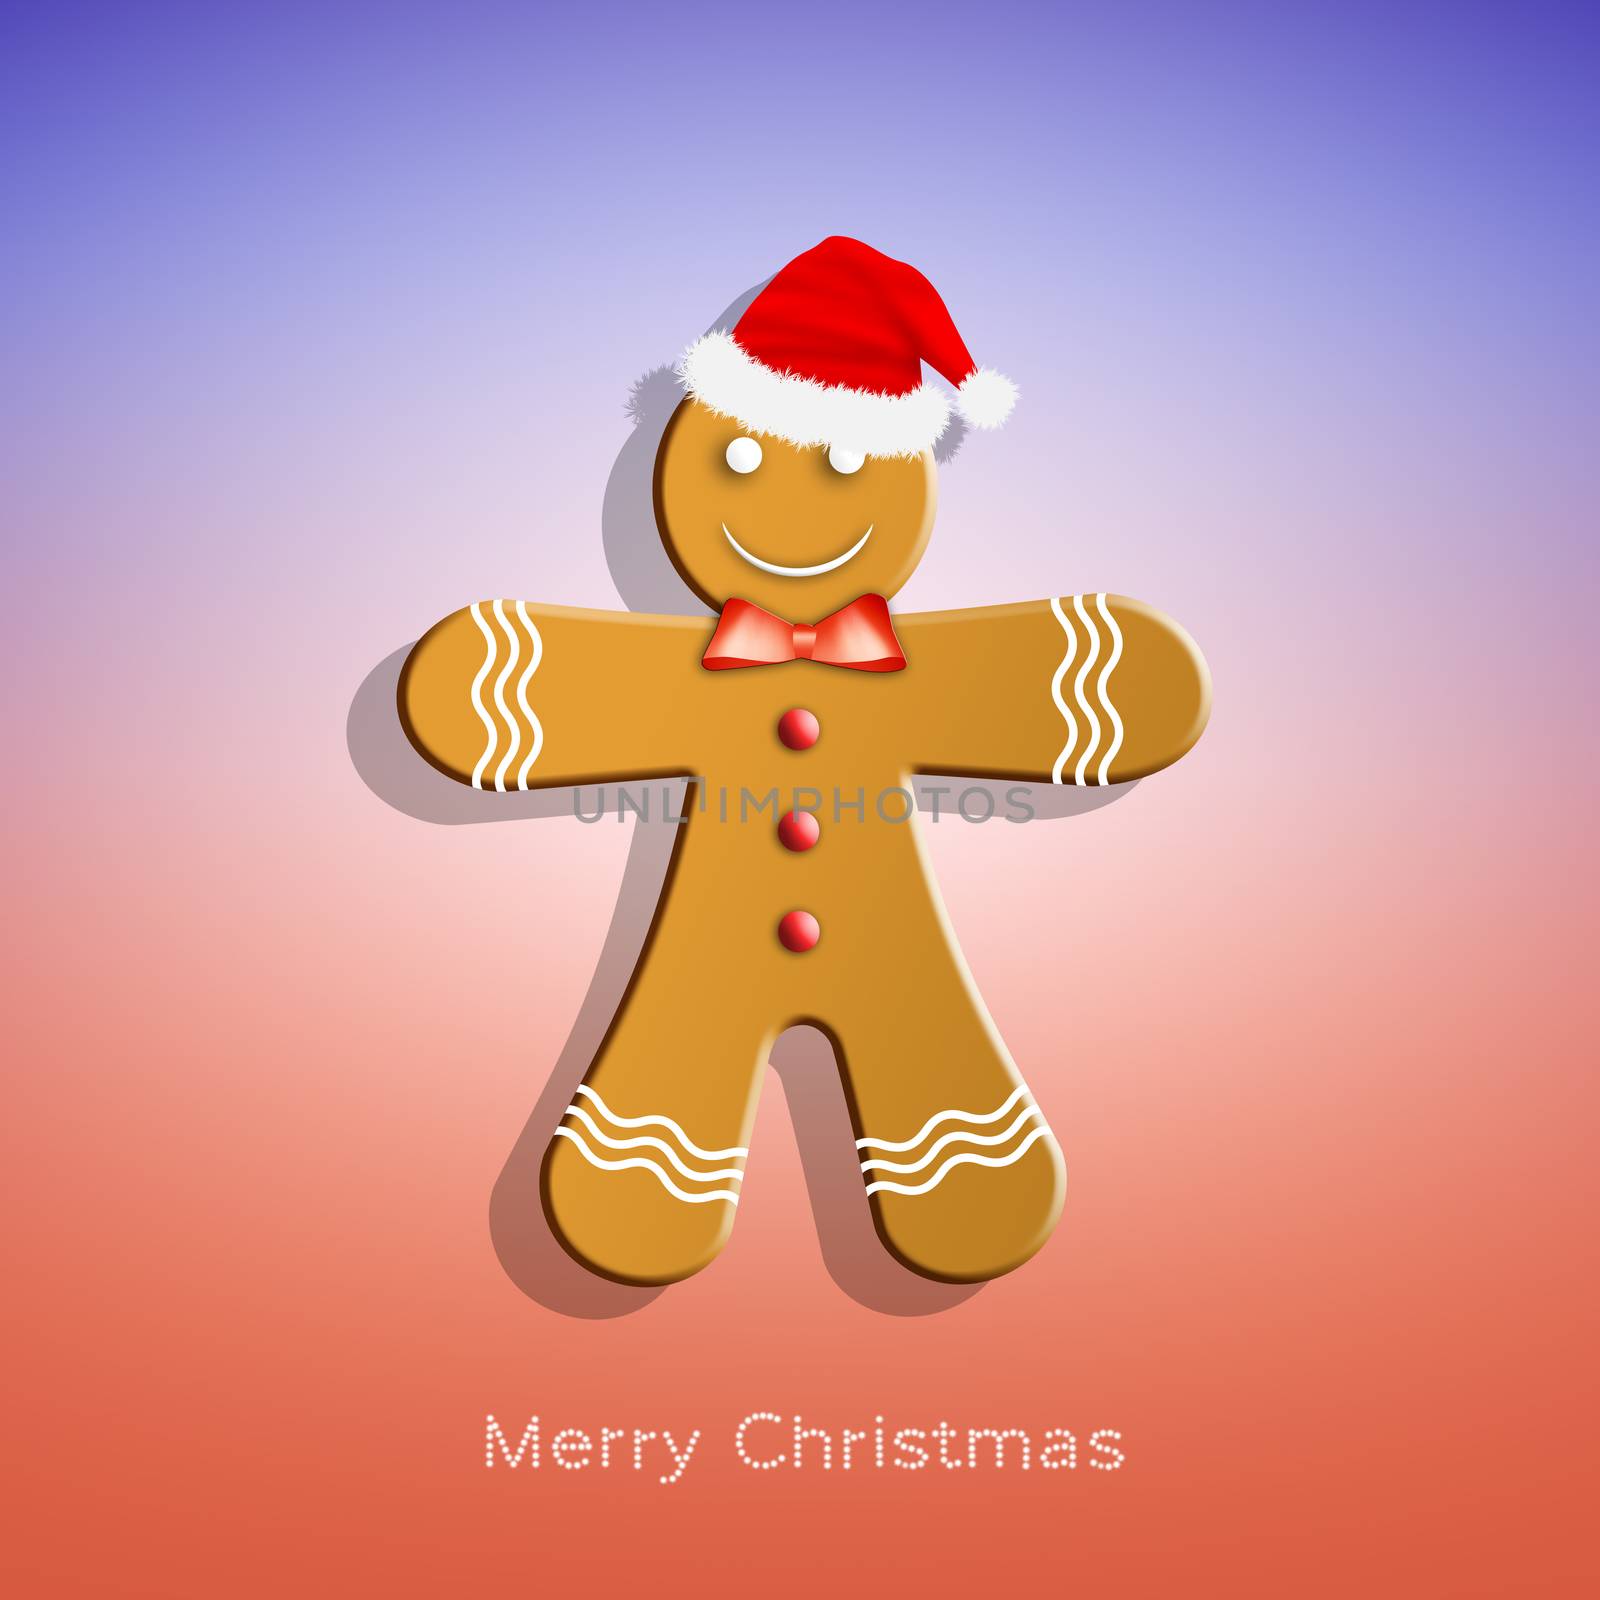 Gingerbread man for Christmas by sognolucido